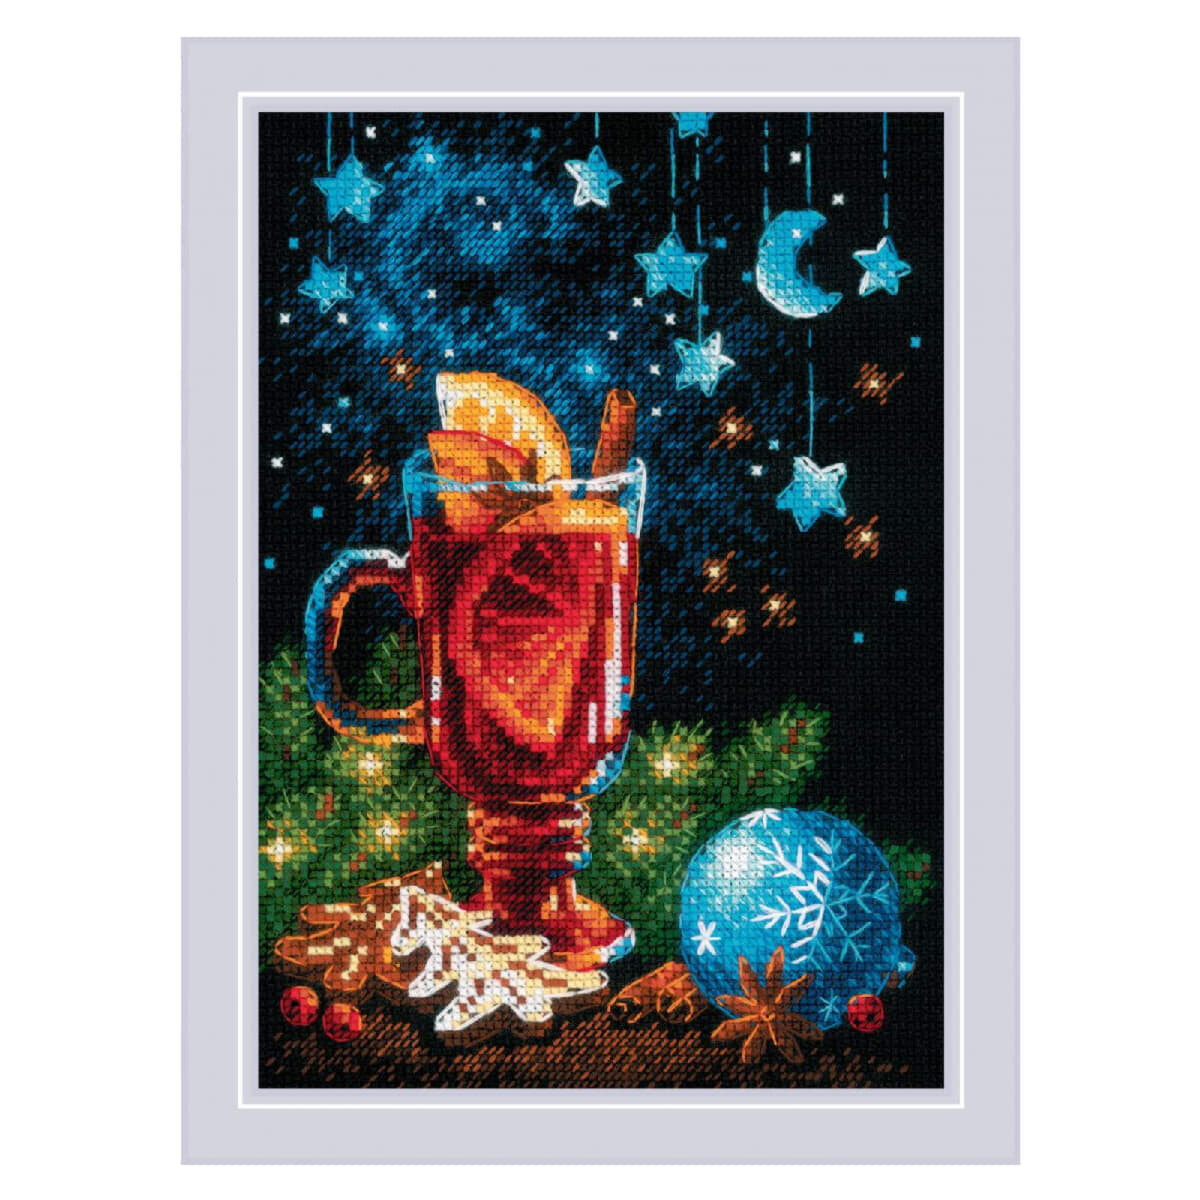 Riolis counted cross stitch kit "Holliday...